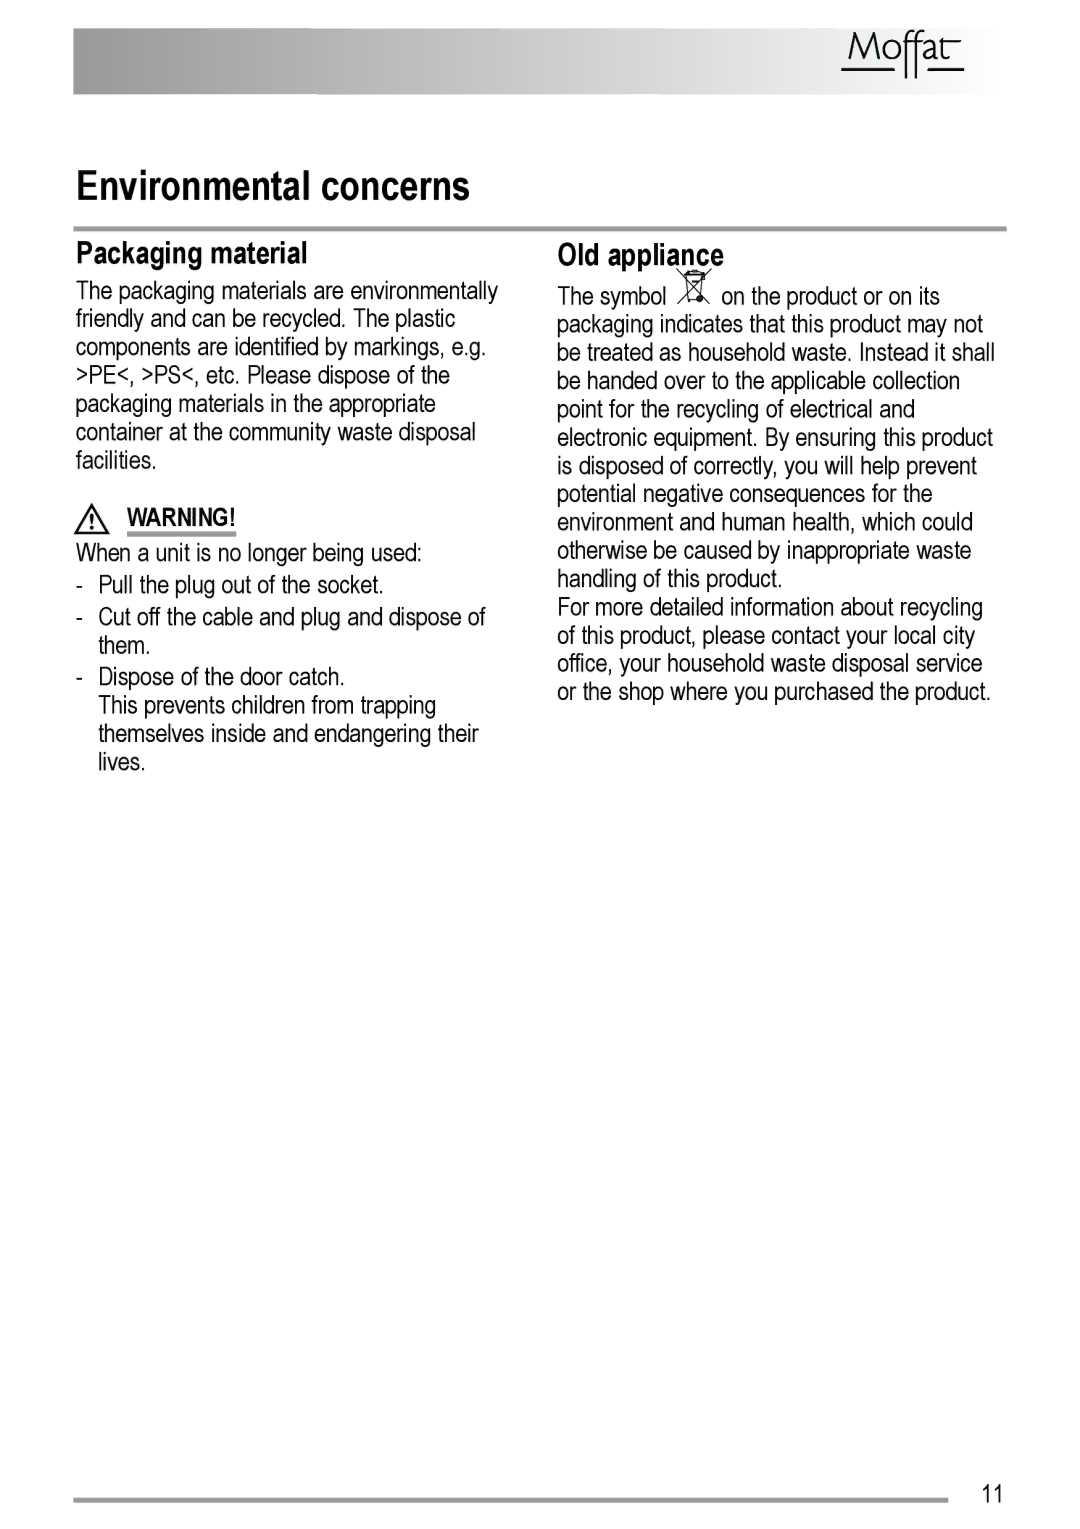 Electrolux U29065 user manual Environmental concerns, Packaging material, Old appliance 